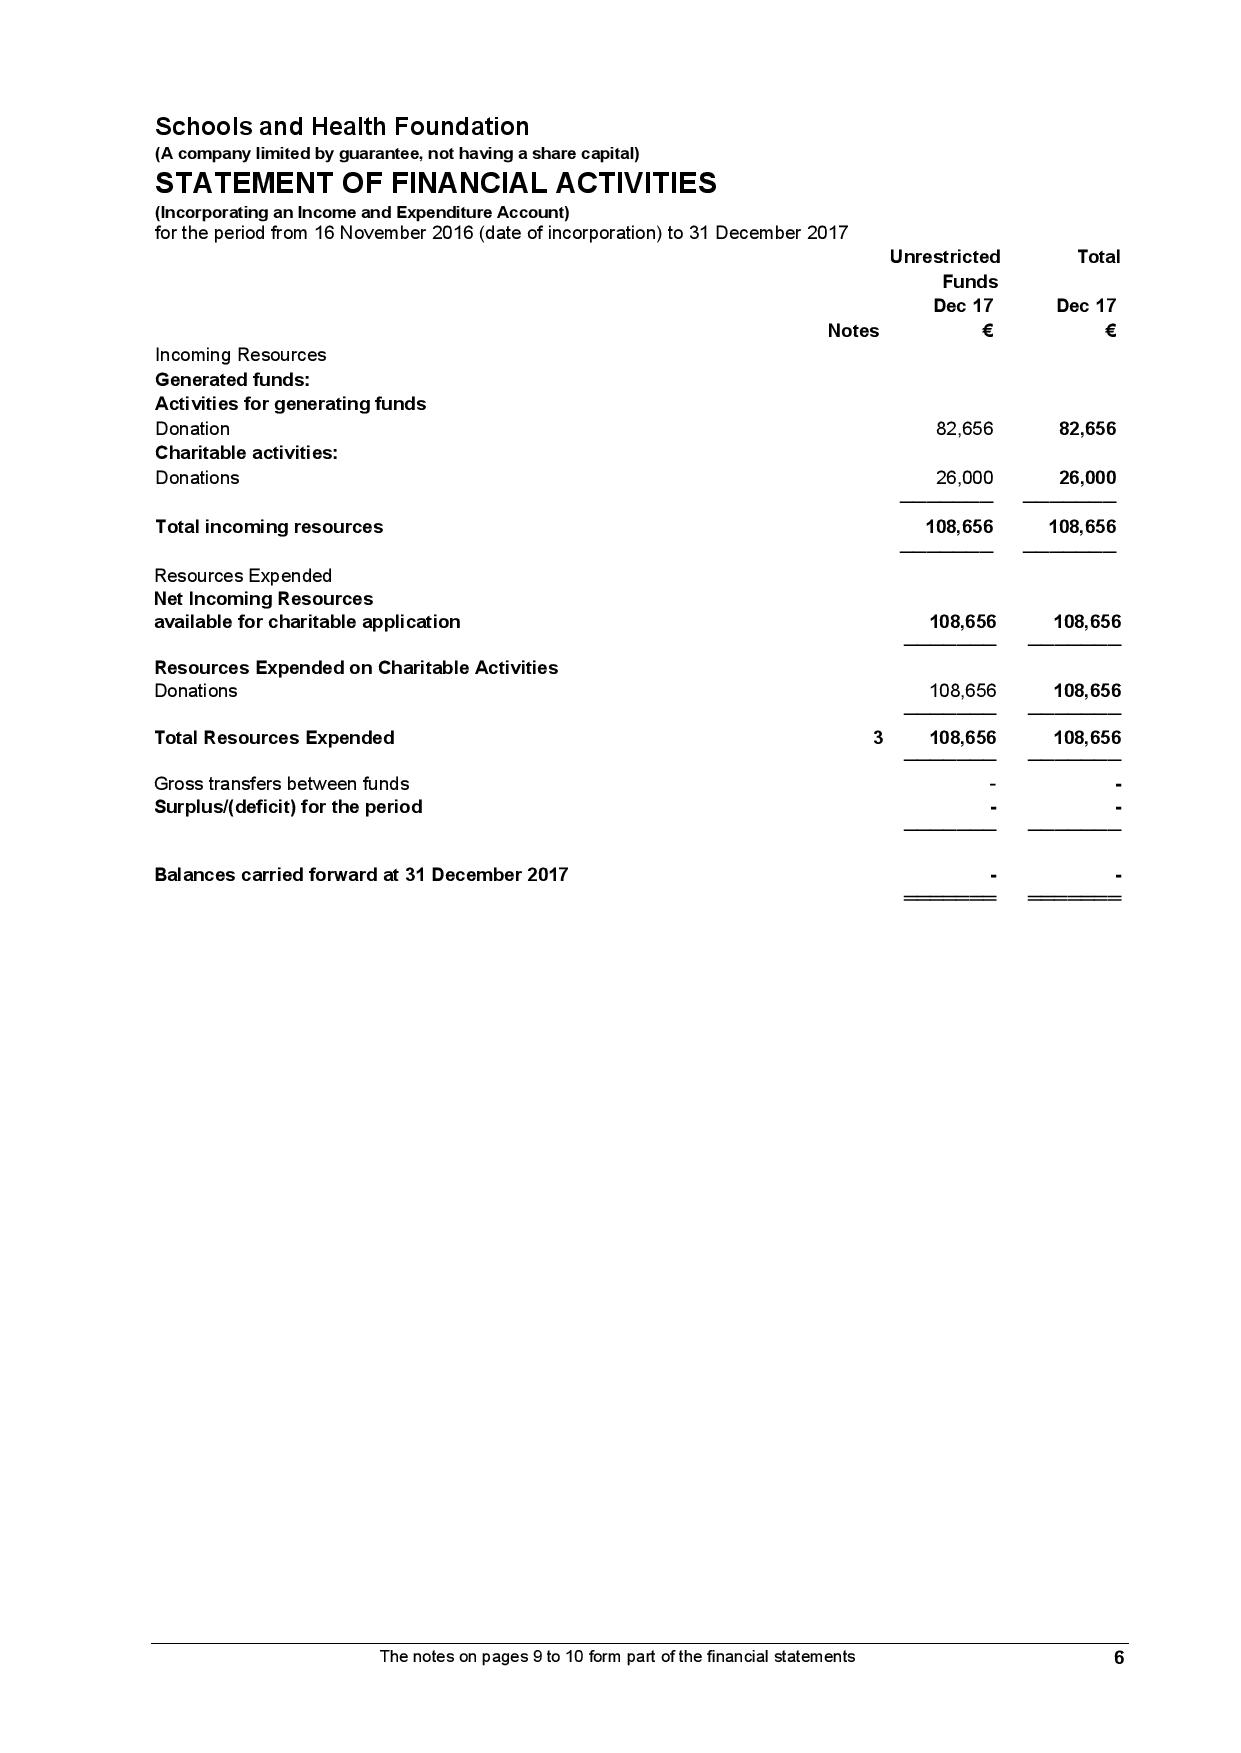 Schools and Health Foundation - Full Accounts 31st December 2017-page-006.jpg